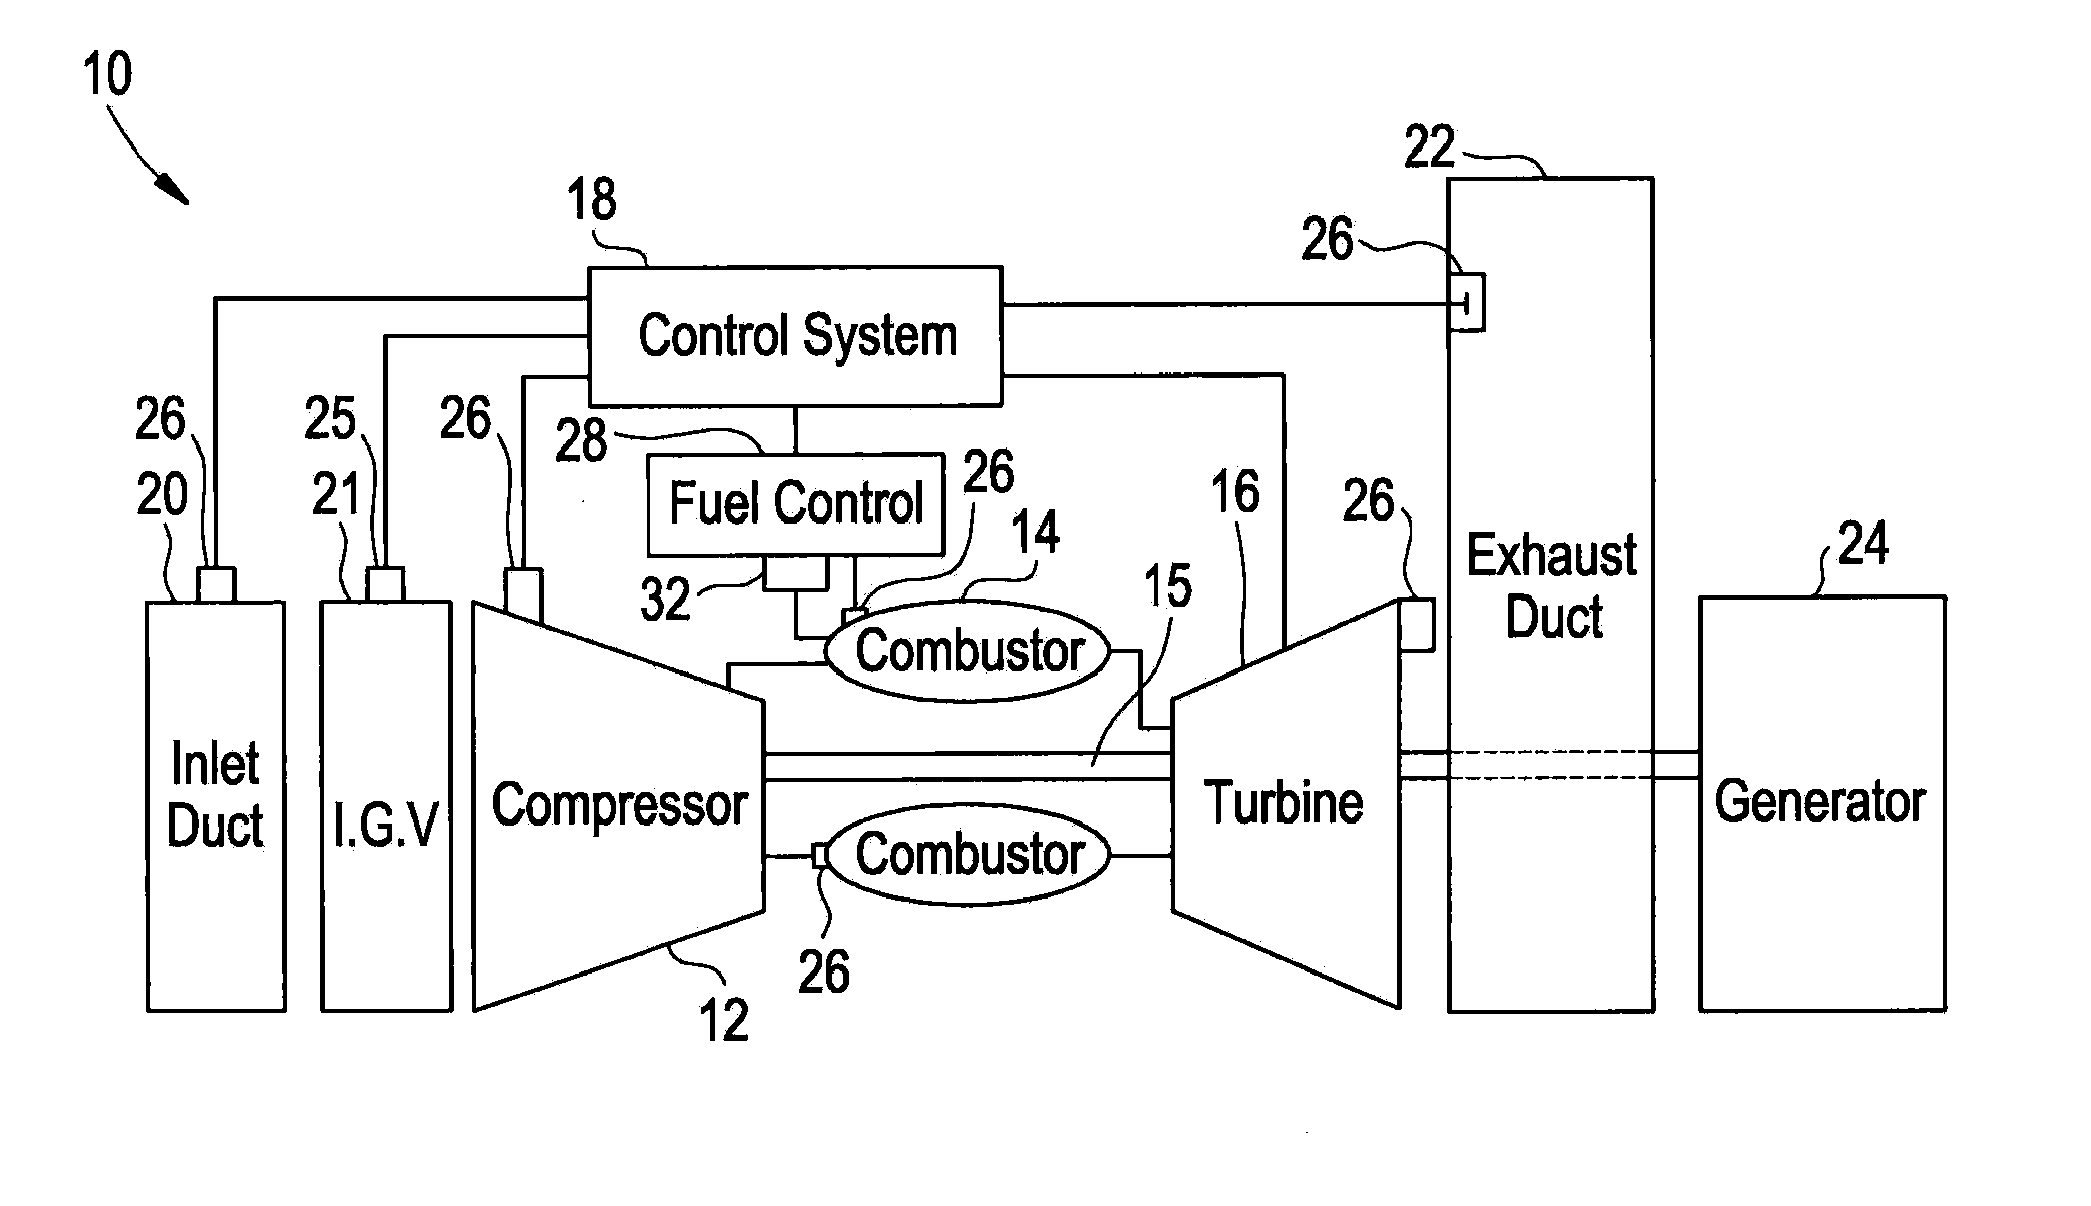 Gas turbine combustion system with rich premixed fuel reforming and methods of use thereof